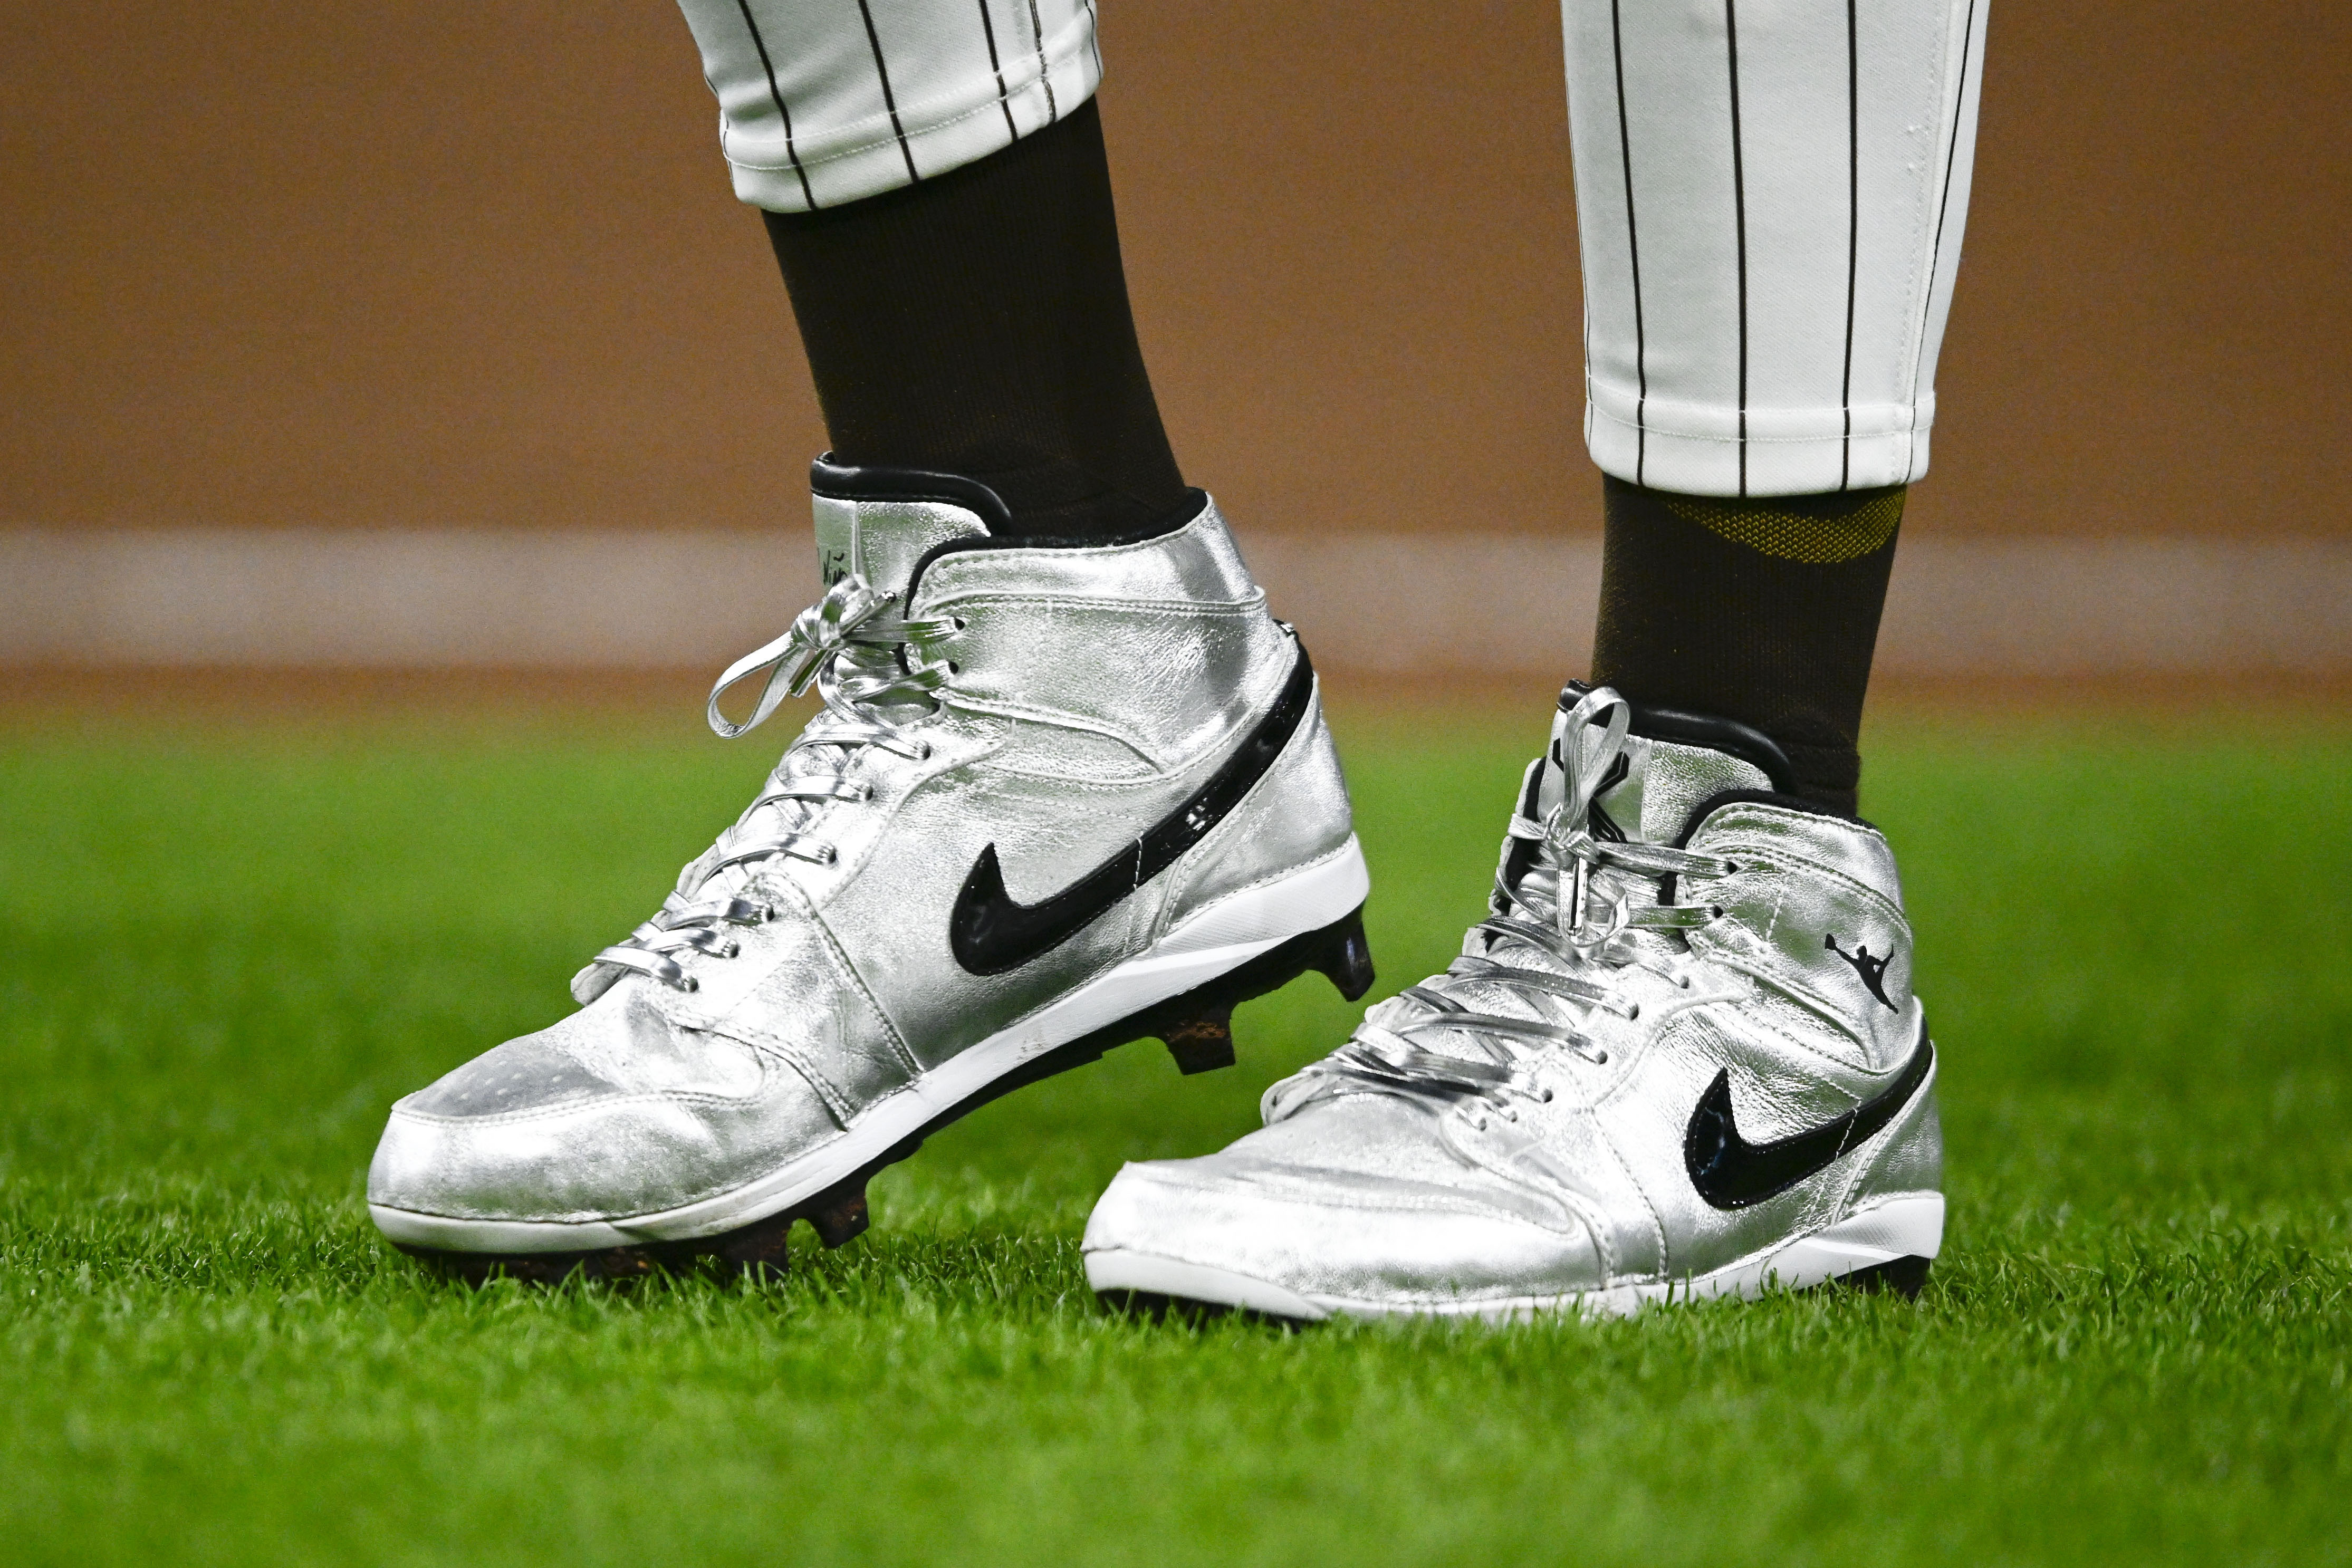 silver Nike cleats